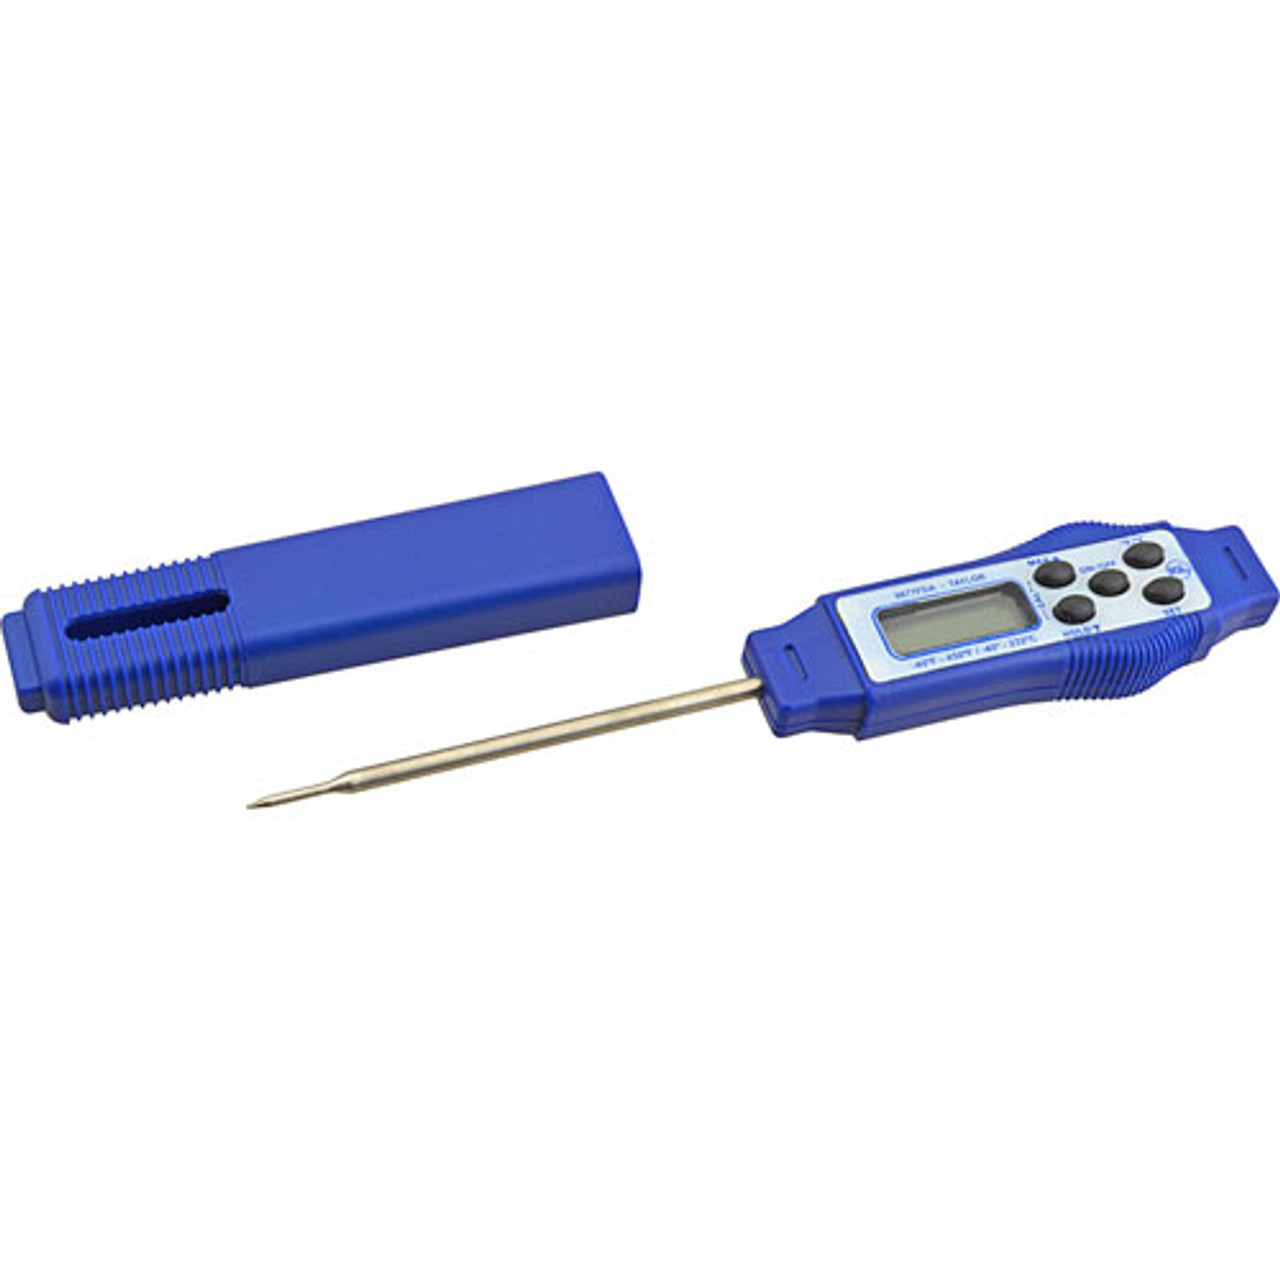 Pocket Thermometer Digital -40 To 450 - Replacement Part For Taylor Thermometer 9877FDABX